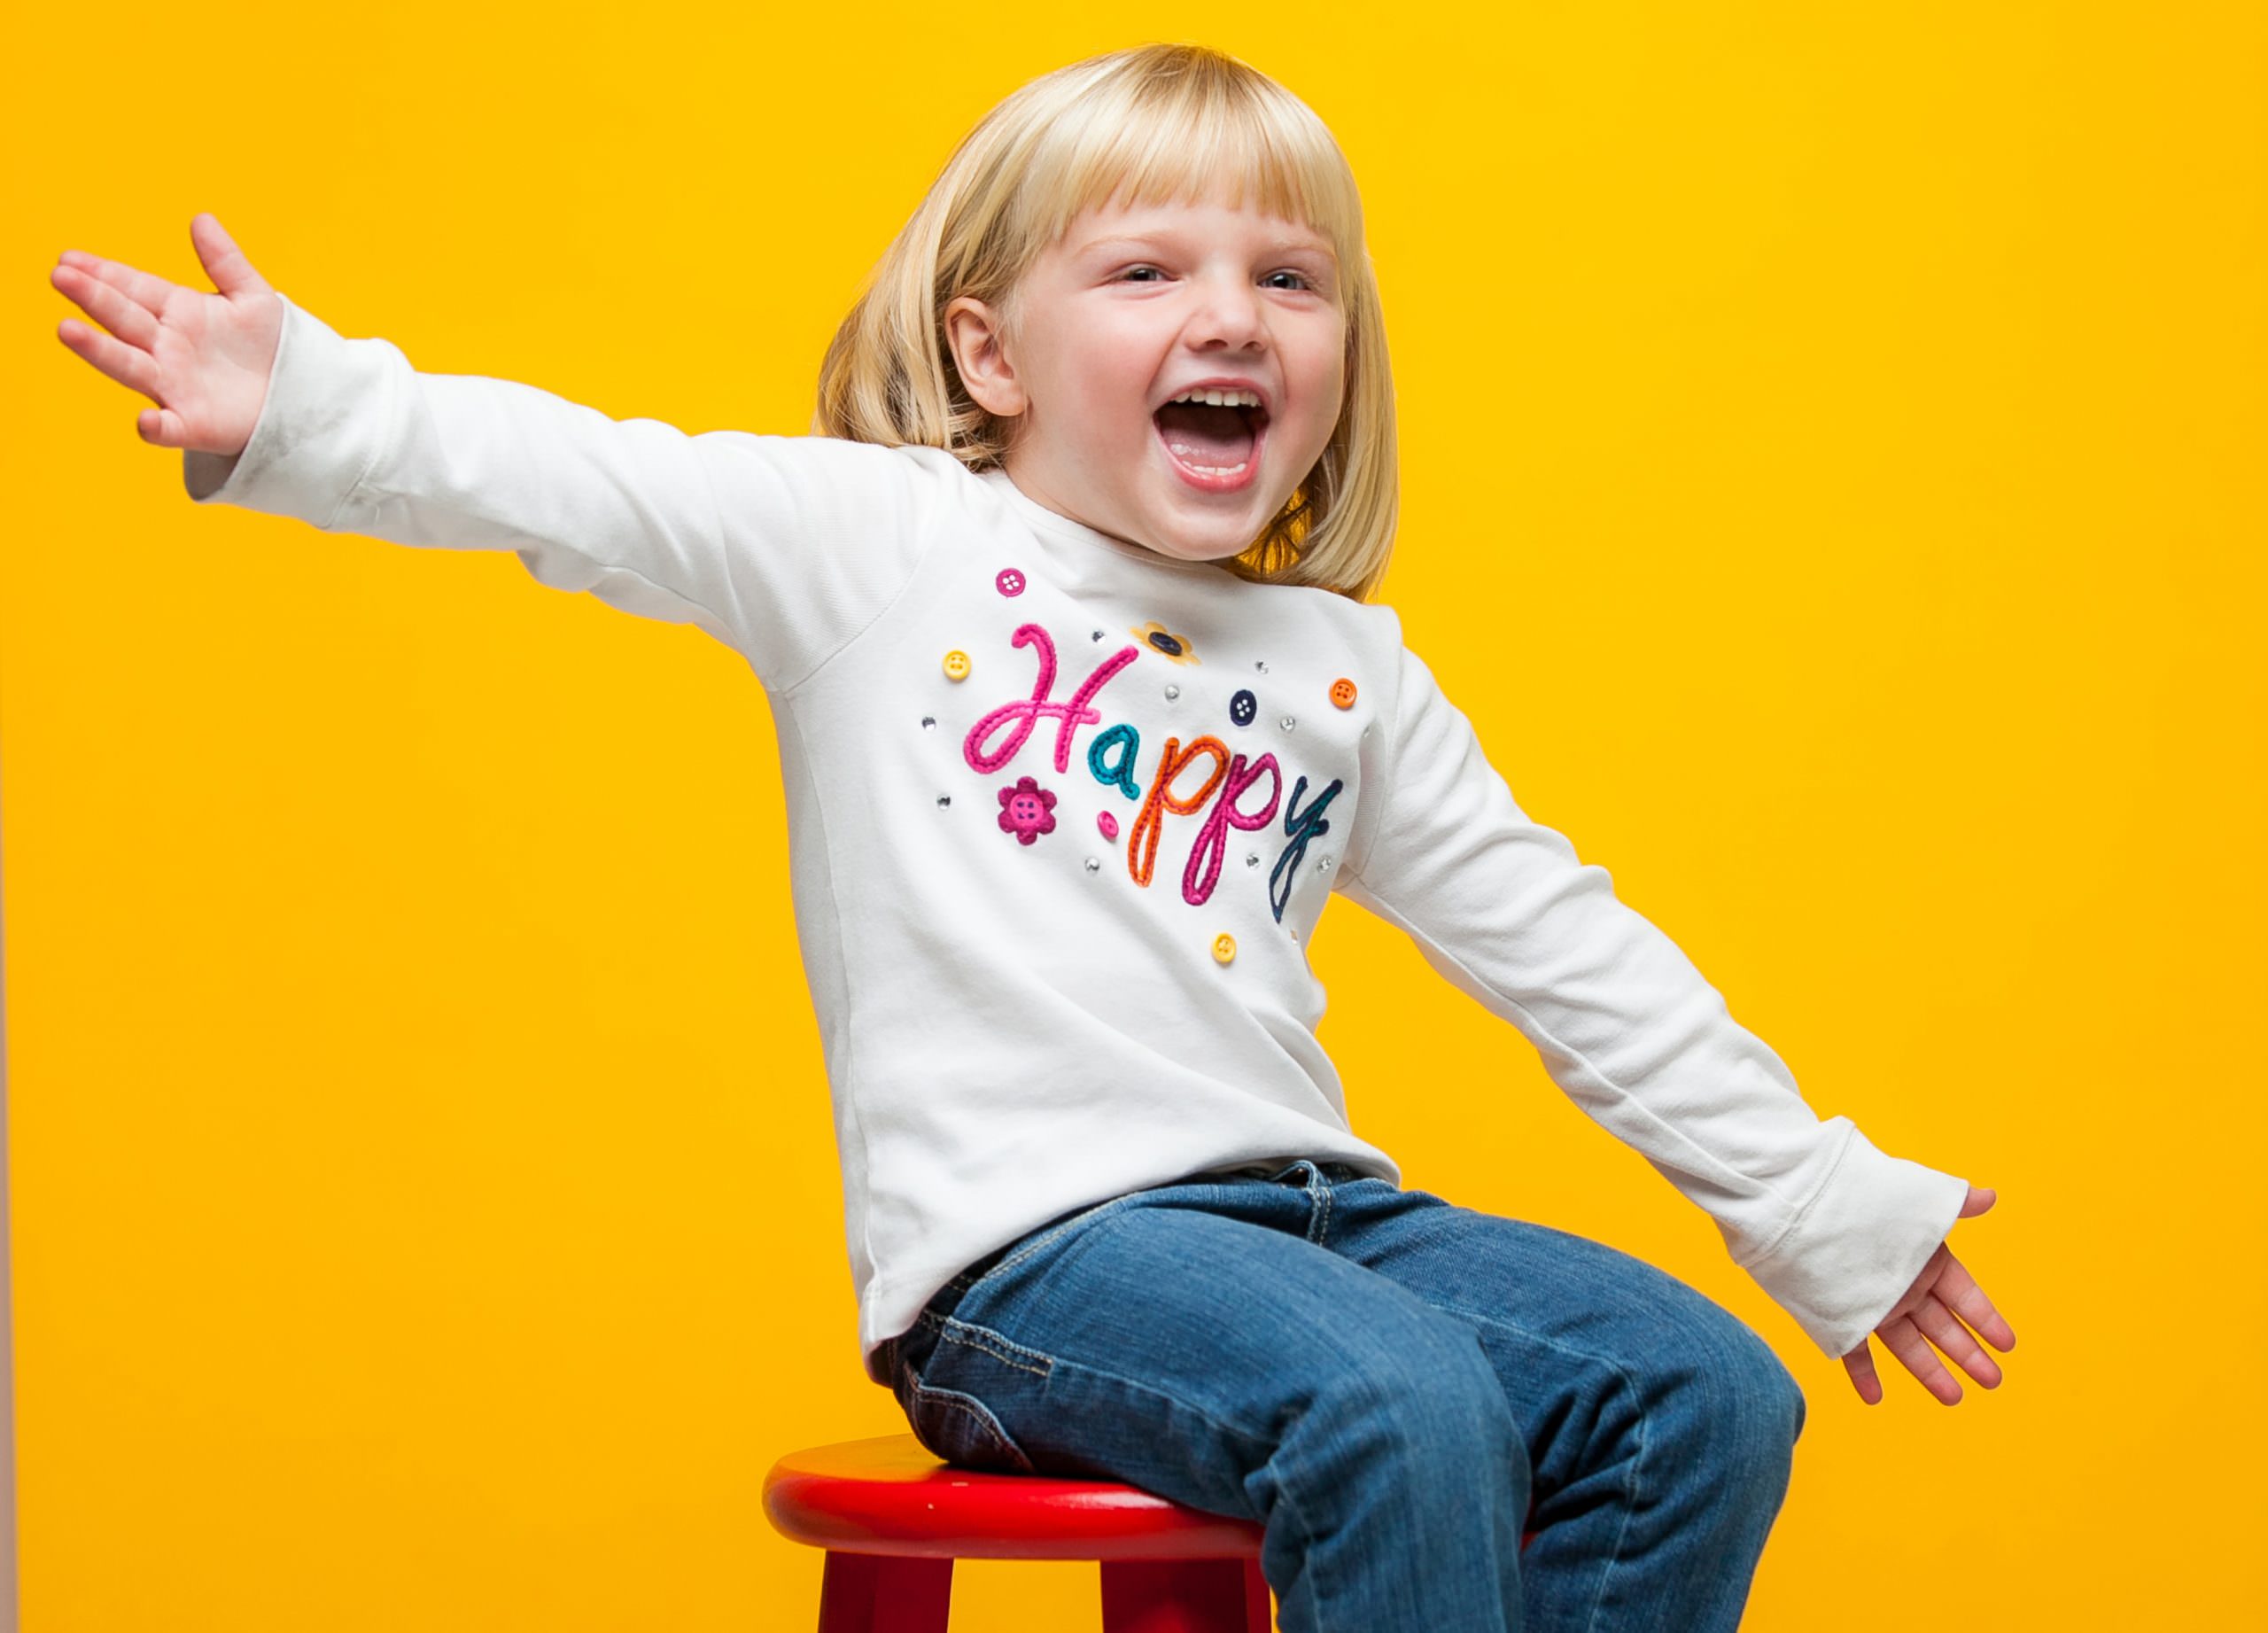 child studio portrait on red stool with yellow backdrop